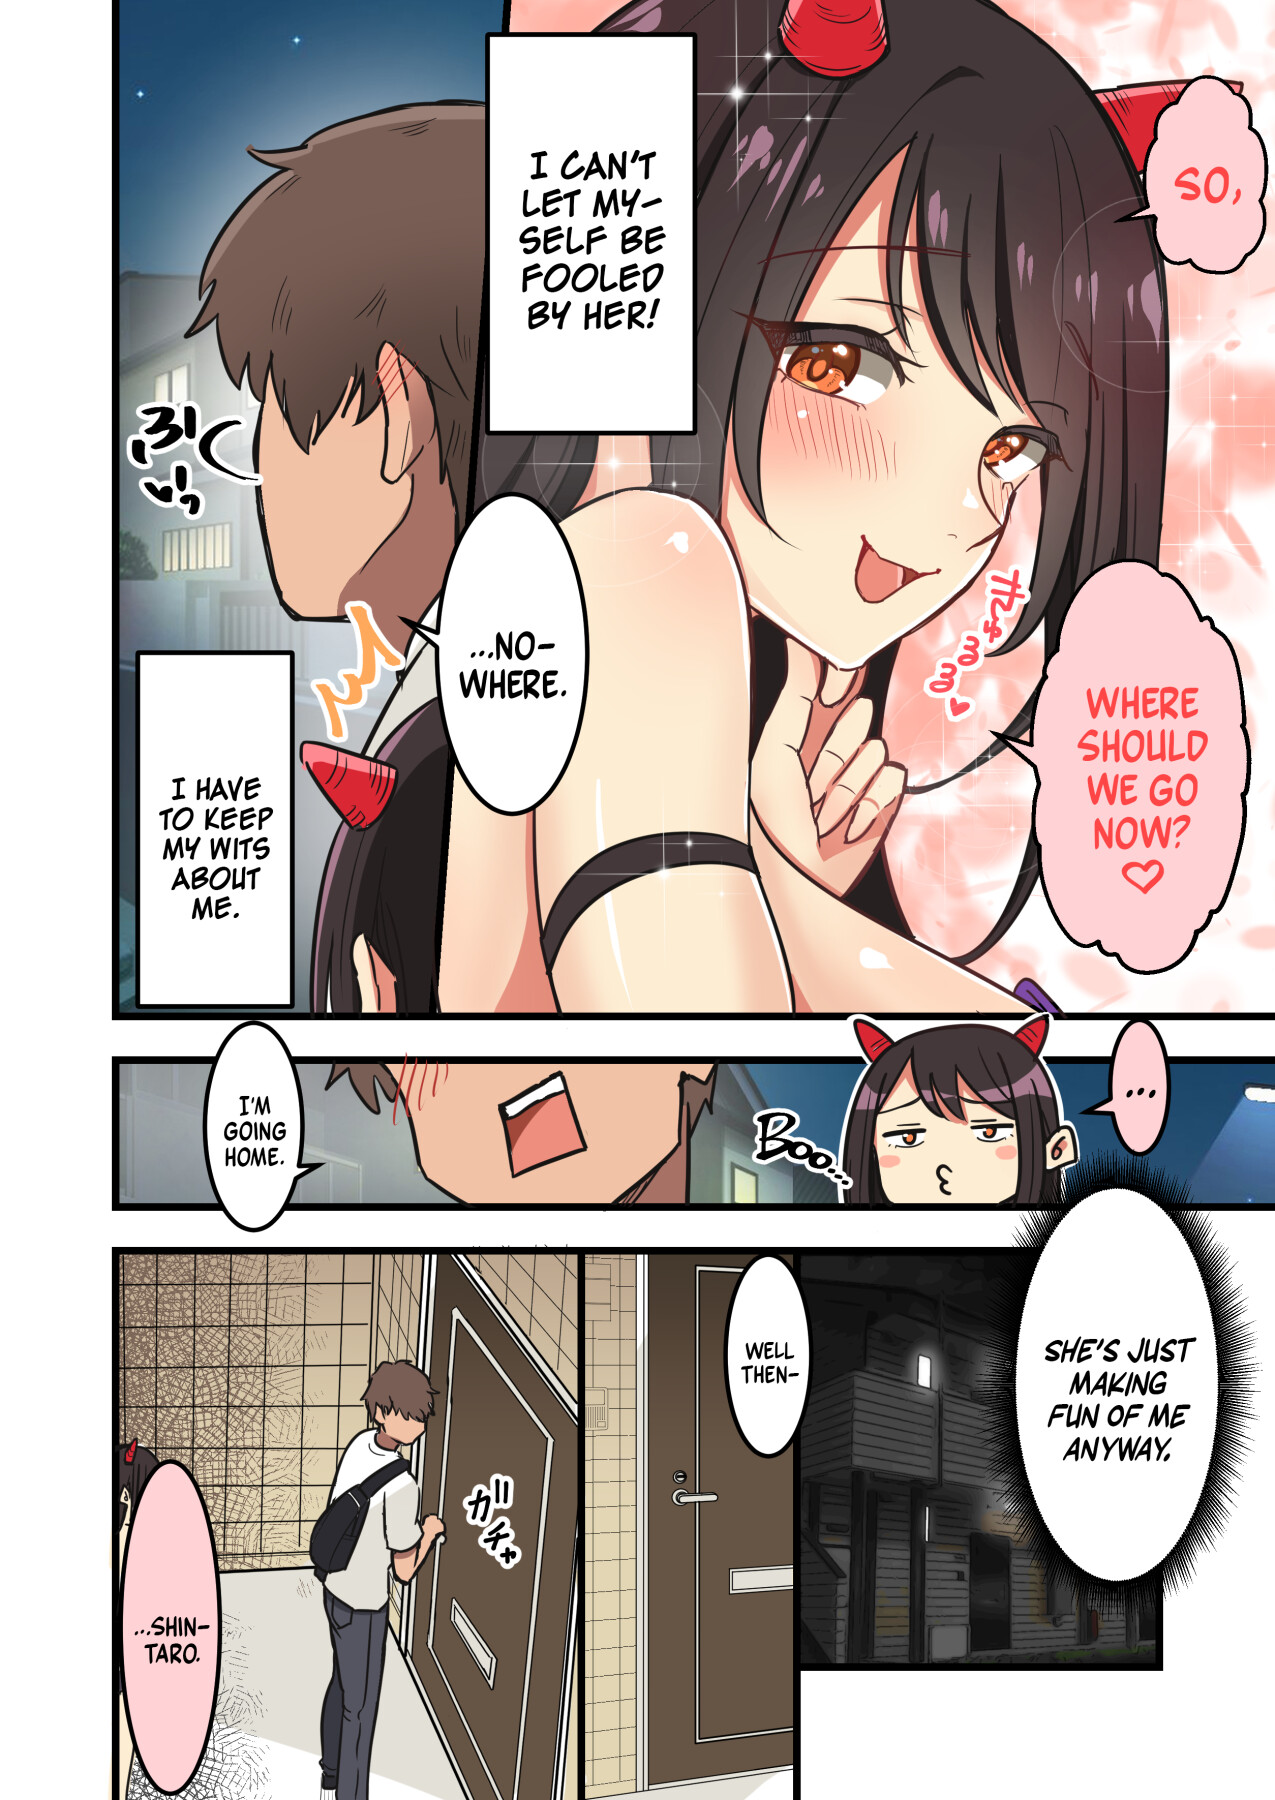 Hentai Manga Comic-My Class President Got a Little Carried Away On Halloween, So I Had toTeach her a Lesson!-Read-2